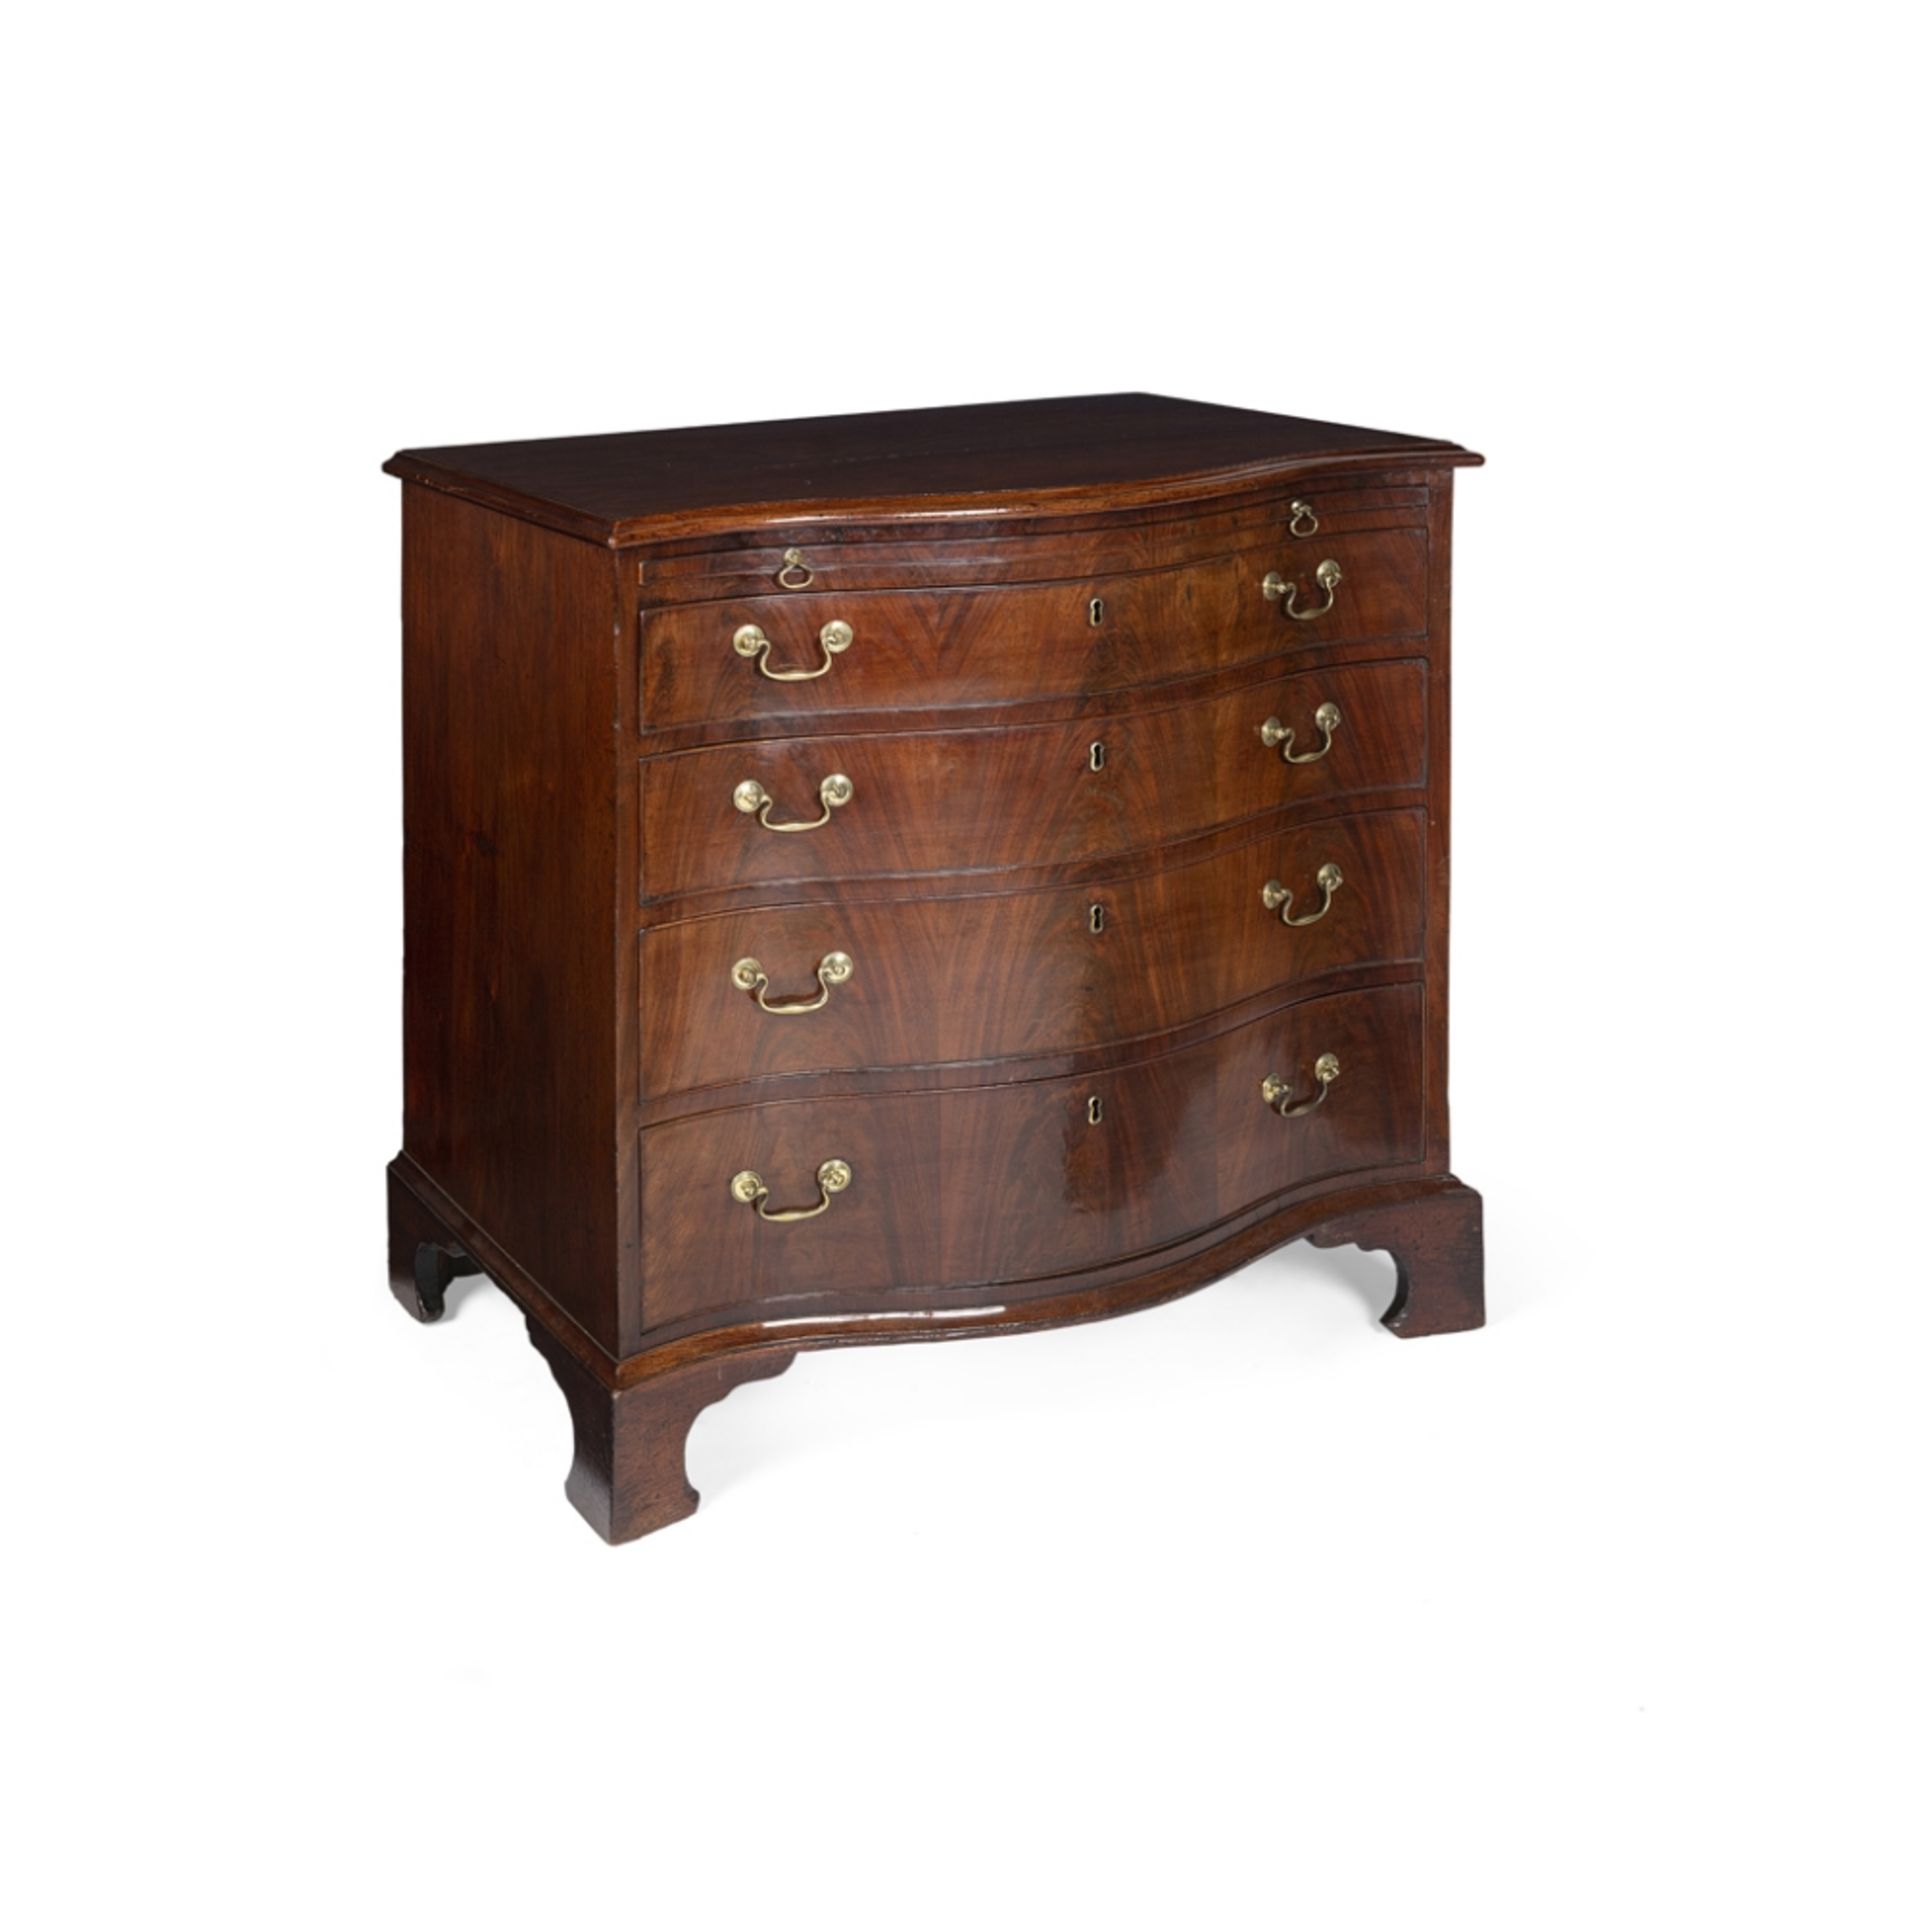 EARLY GEORGE III MAHOGANY SERPENTINE CHEST OF DRAWERSMID 18TH CENTURY the top with a moulded edge